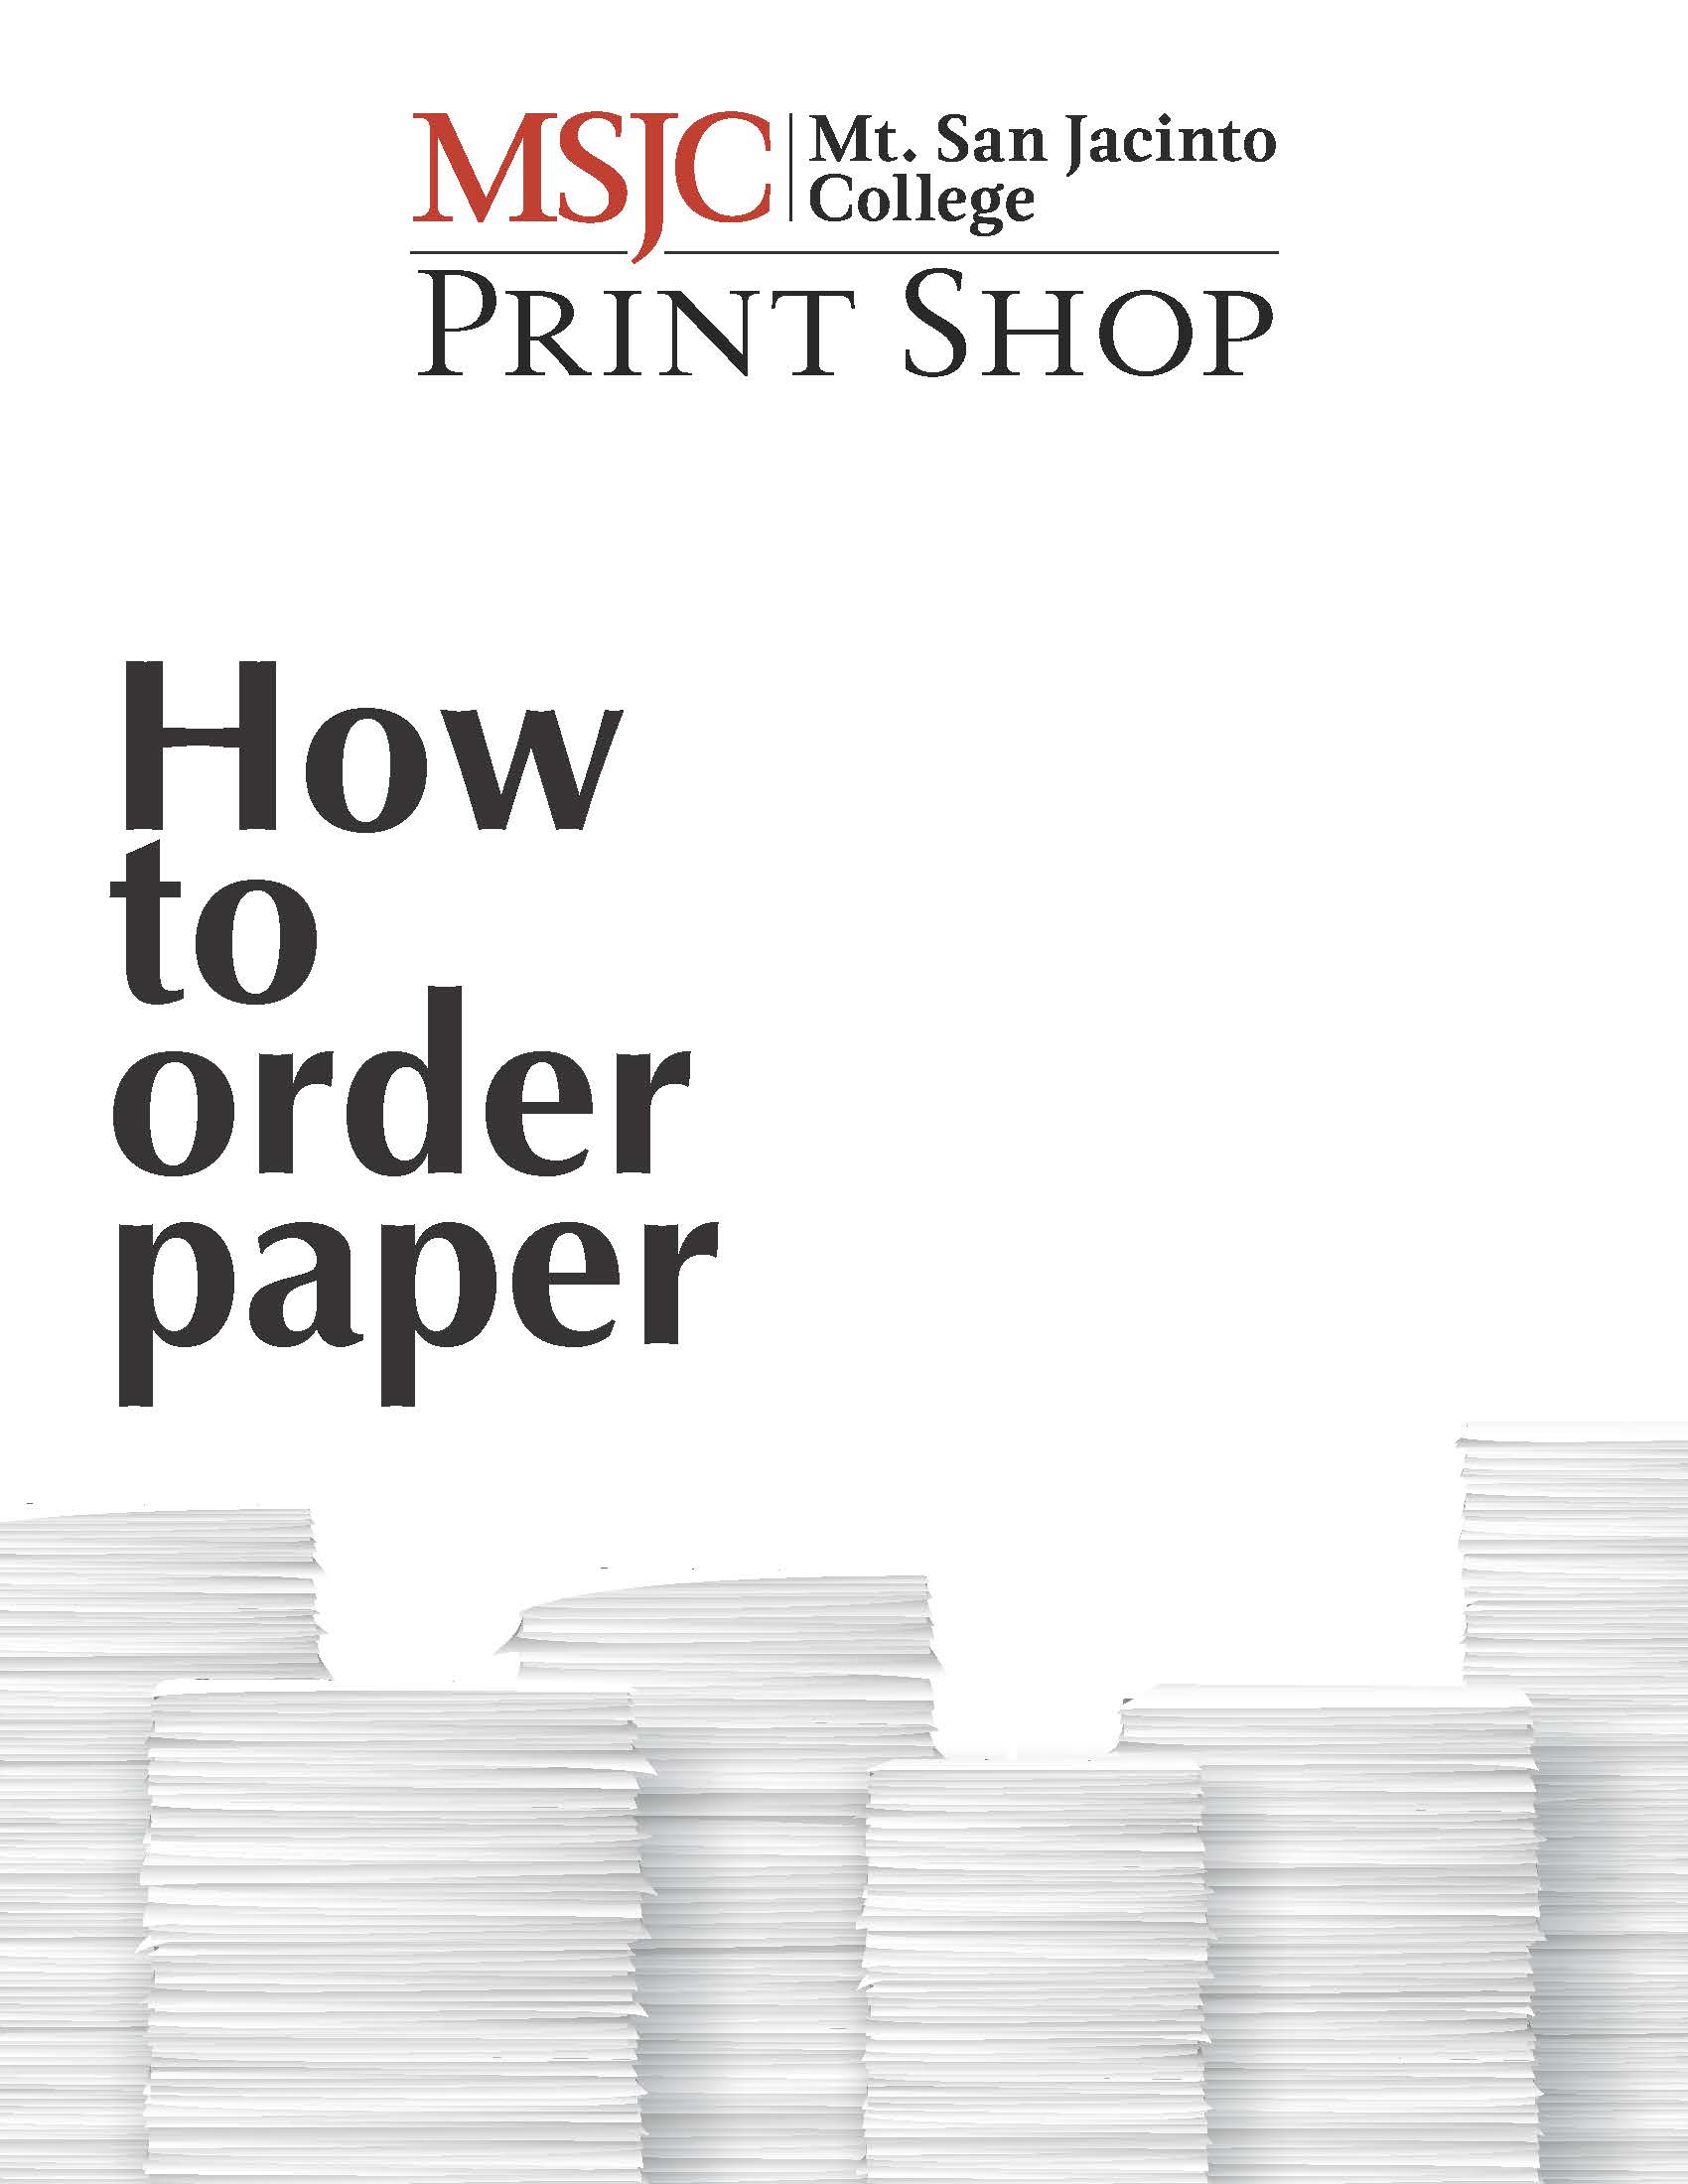 How to Order Paper from the MSJC Print Shop